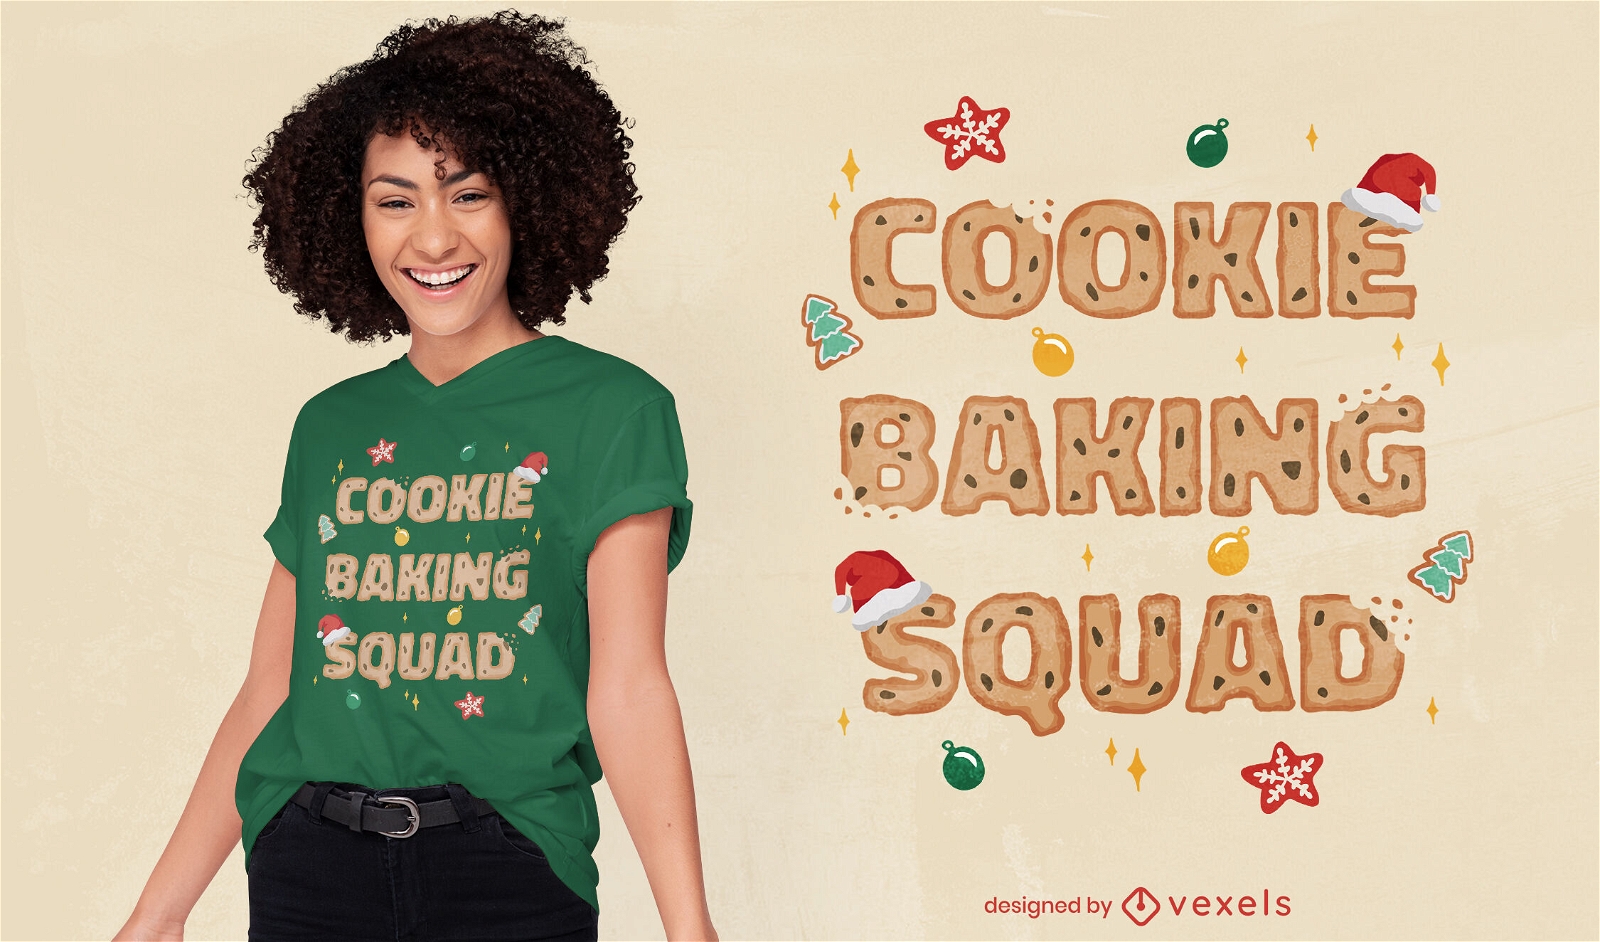 Cookie baking squad Christmas t-shirt design